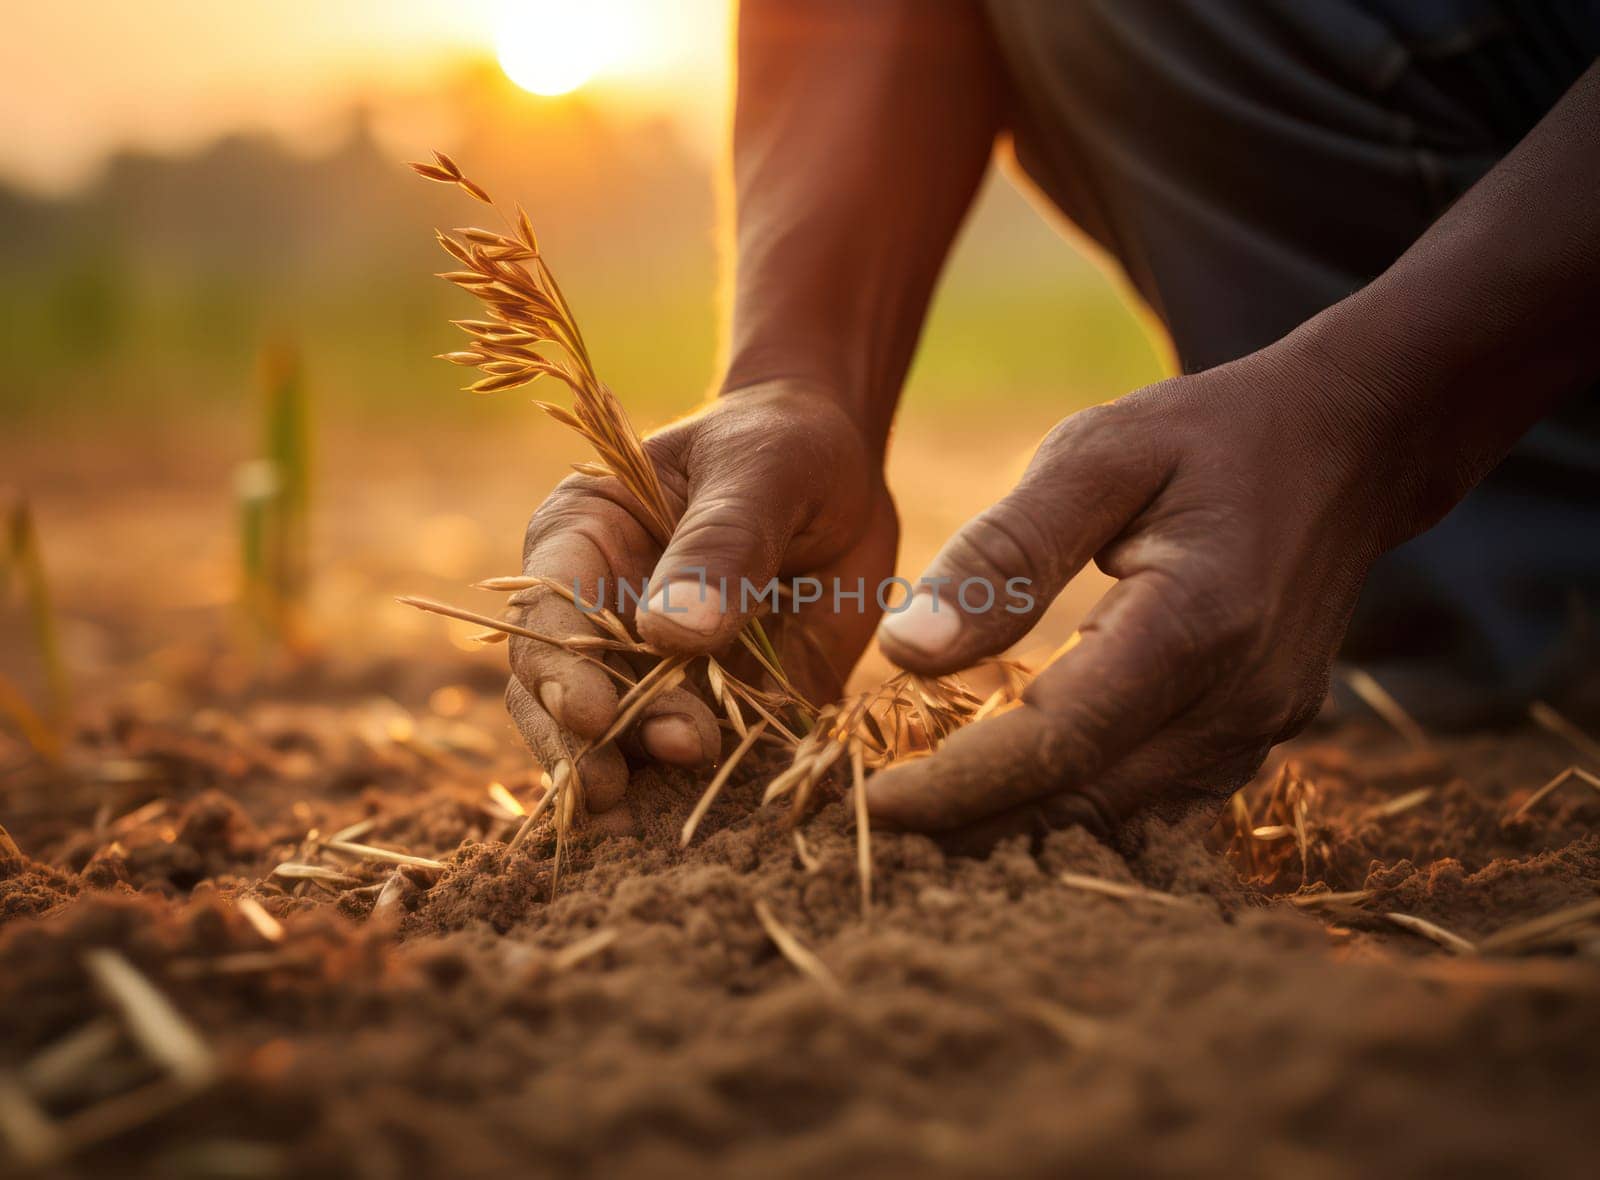 Organic Growth: A Farmer's Hands Planting in a Green Field at Sunset by Vichizh